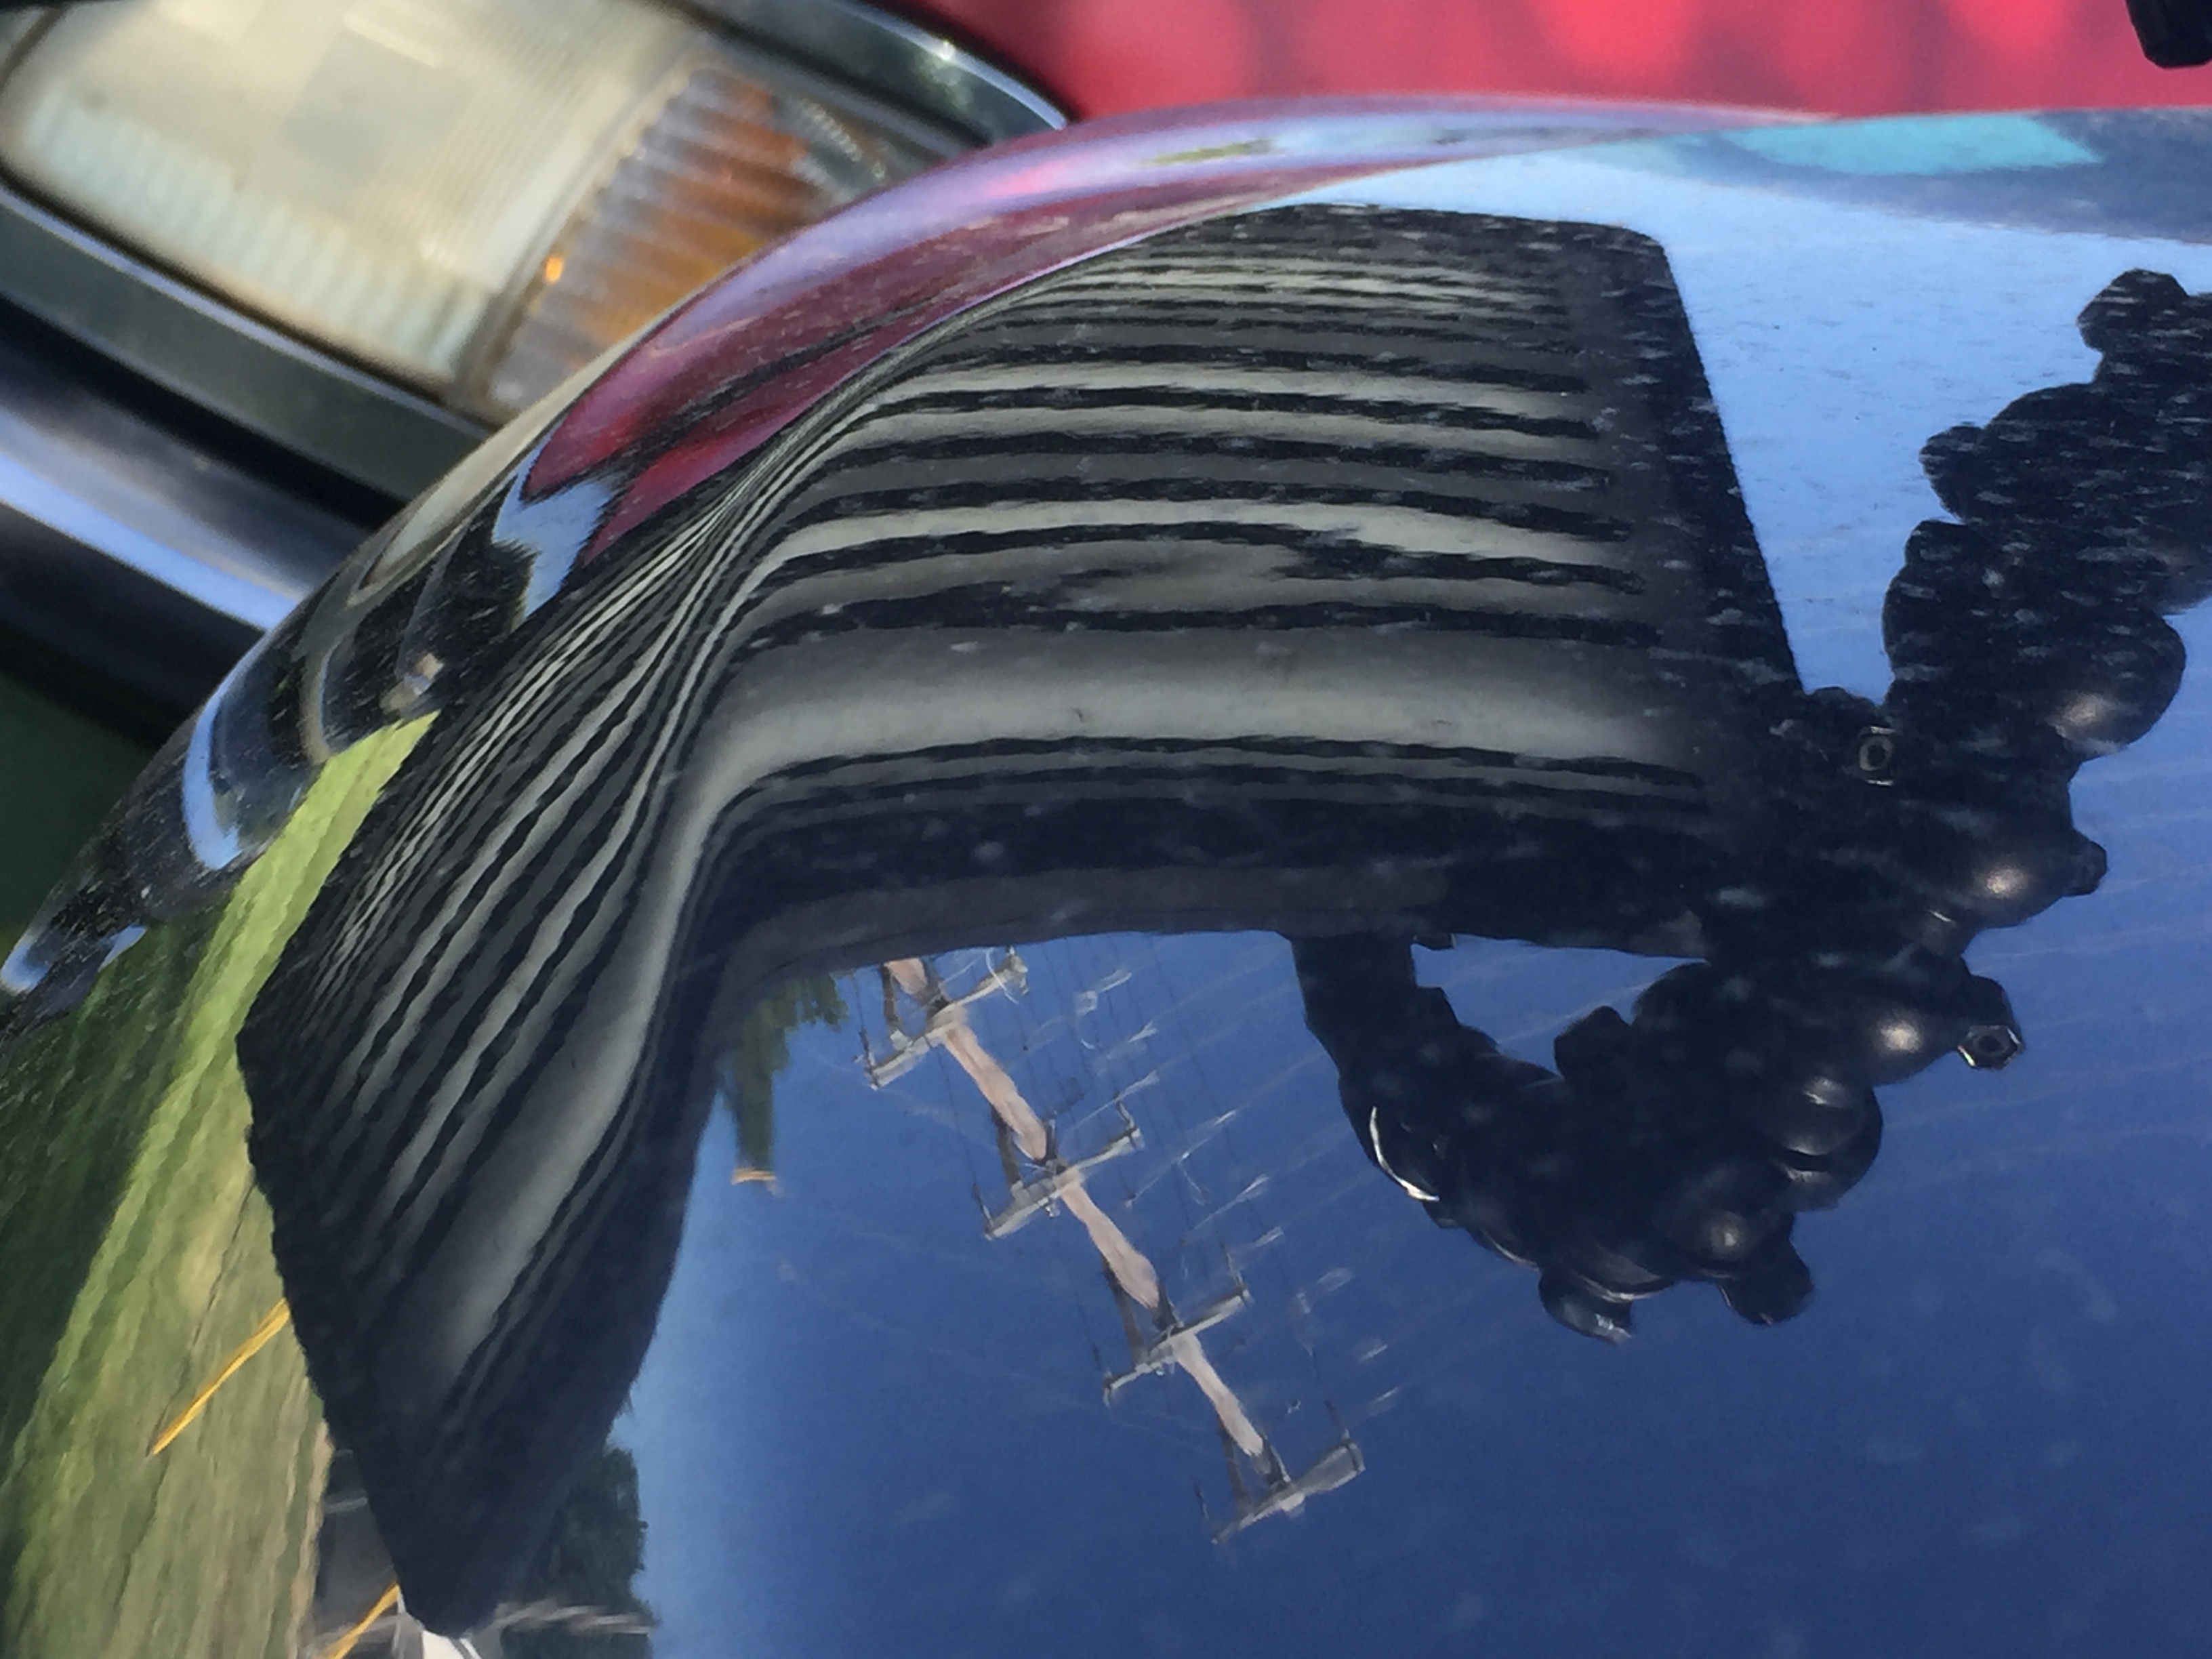 2014 Grand Cherokee Dent Repair on Hood, by Michael Bocek out of Springfield, IL http://217dent.com